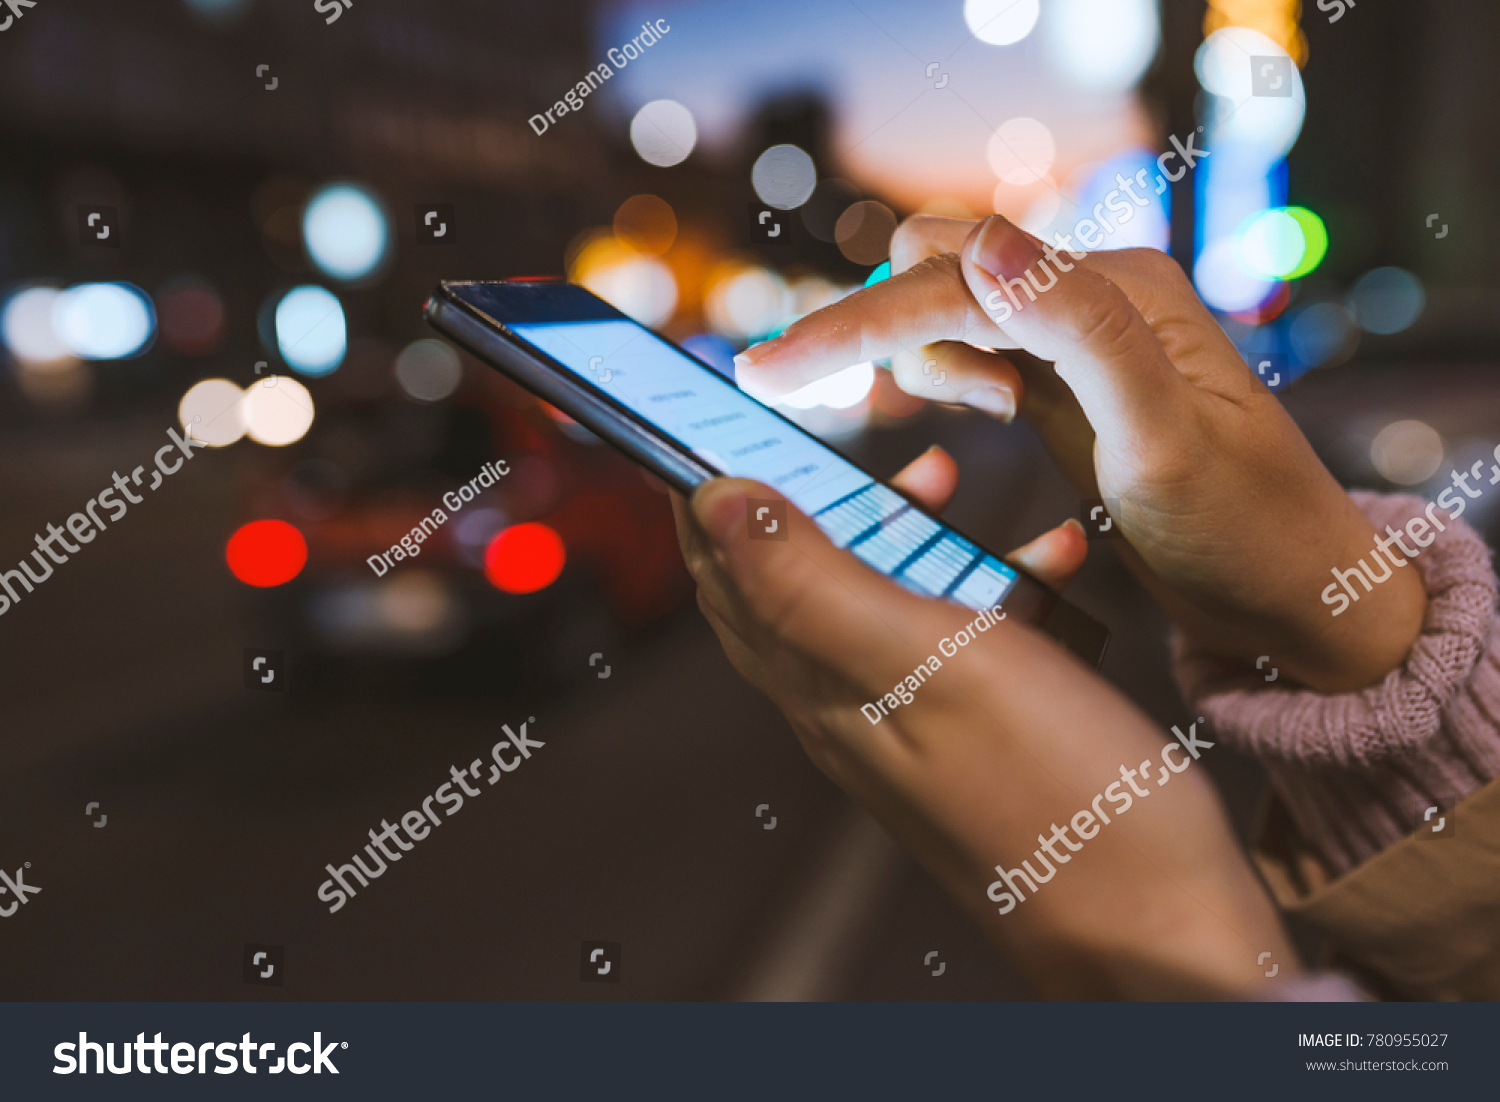 Girl pointing finger on screen smartphone on background illumination bokeh color light in night atmospheric city, using in hands texting mobile phone. Using cellphone at night #780955027